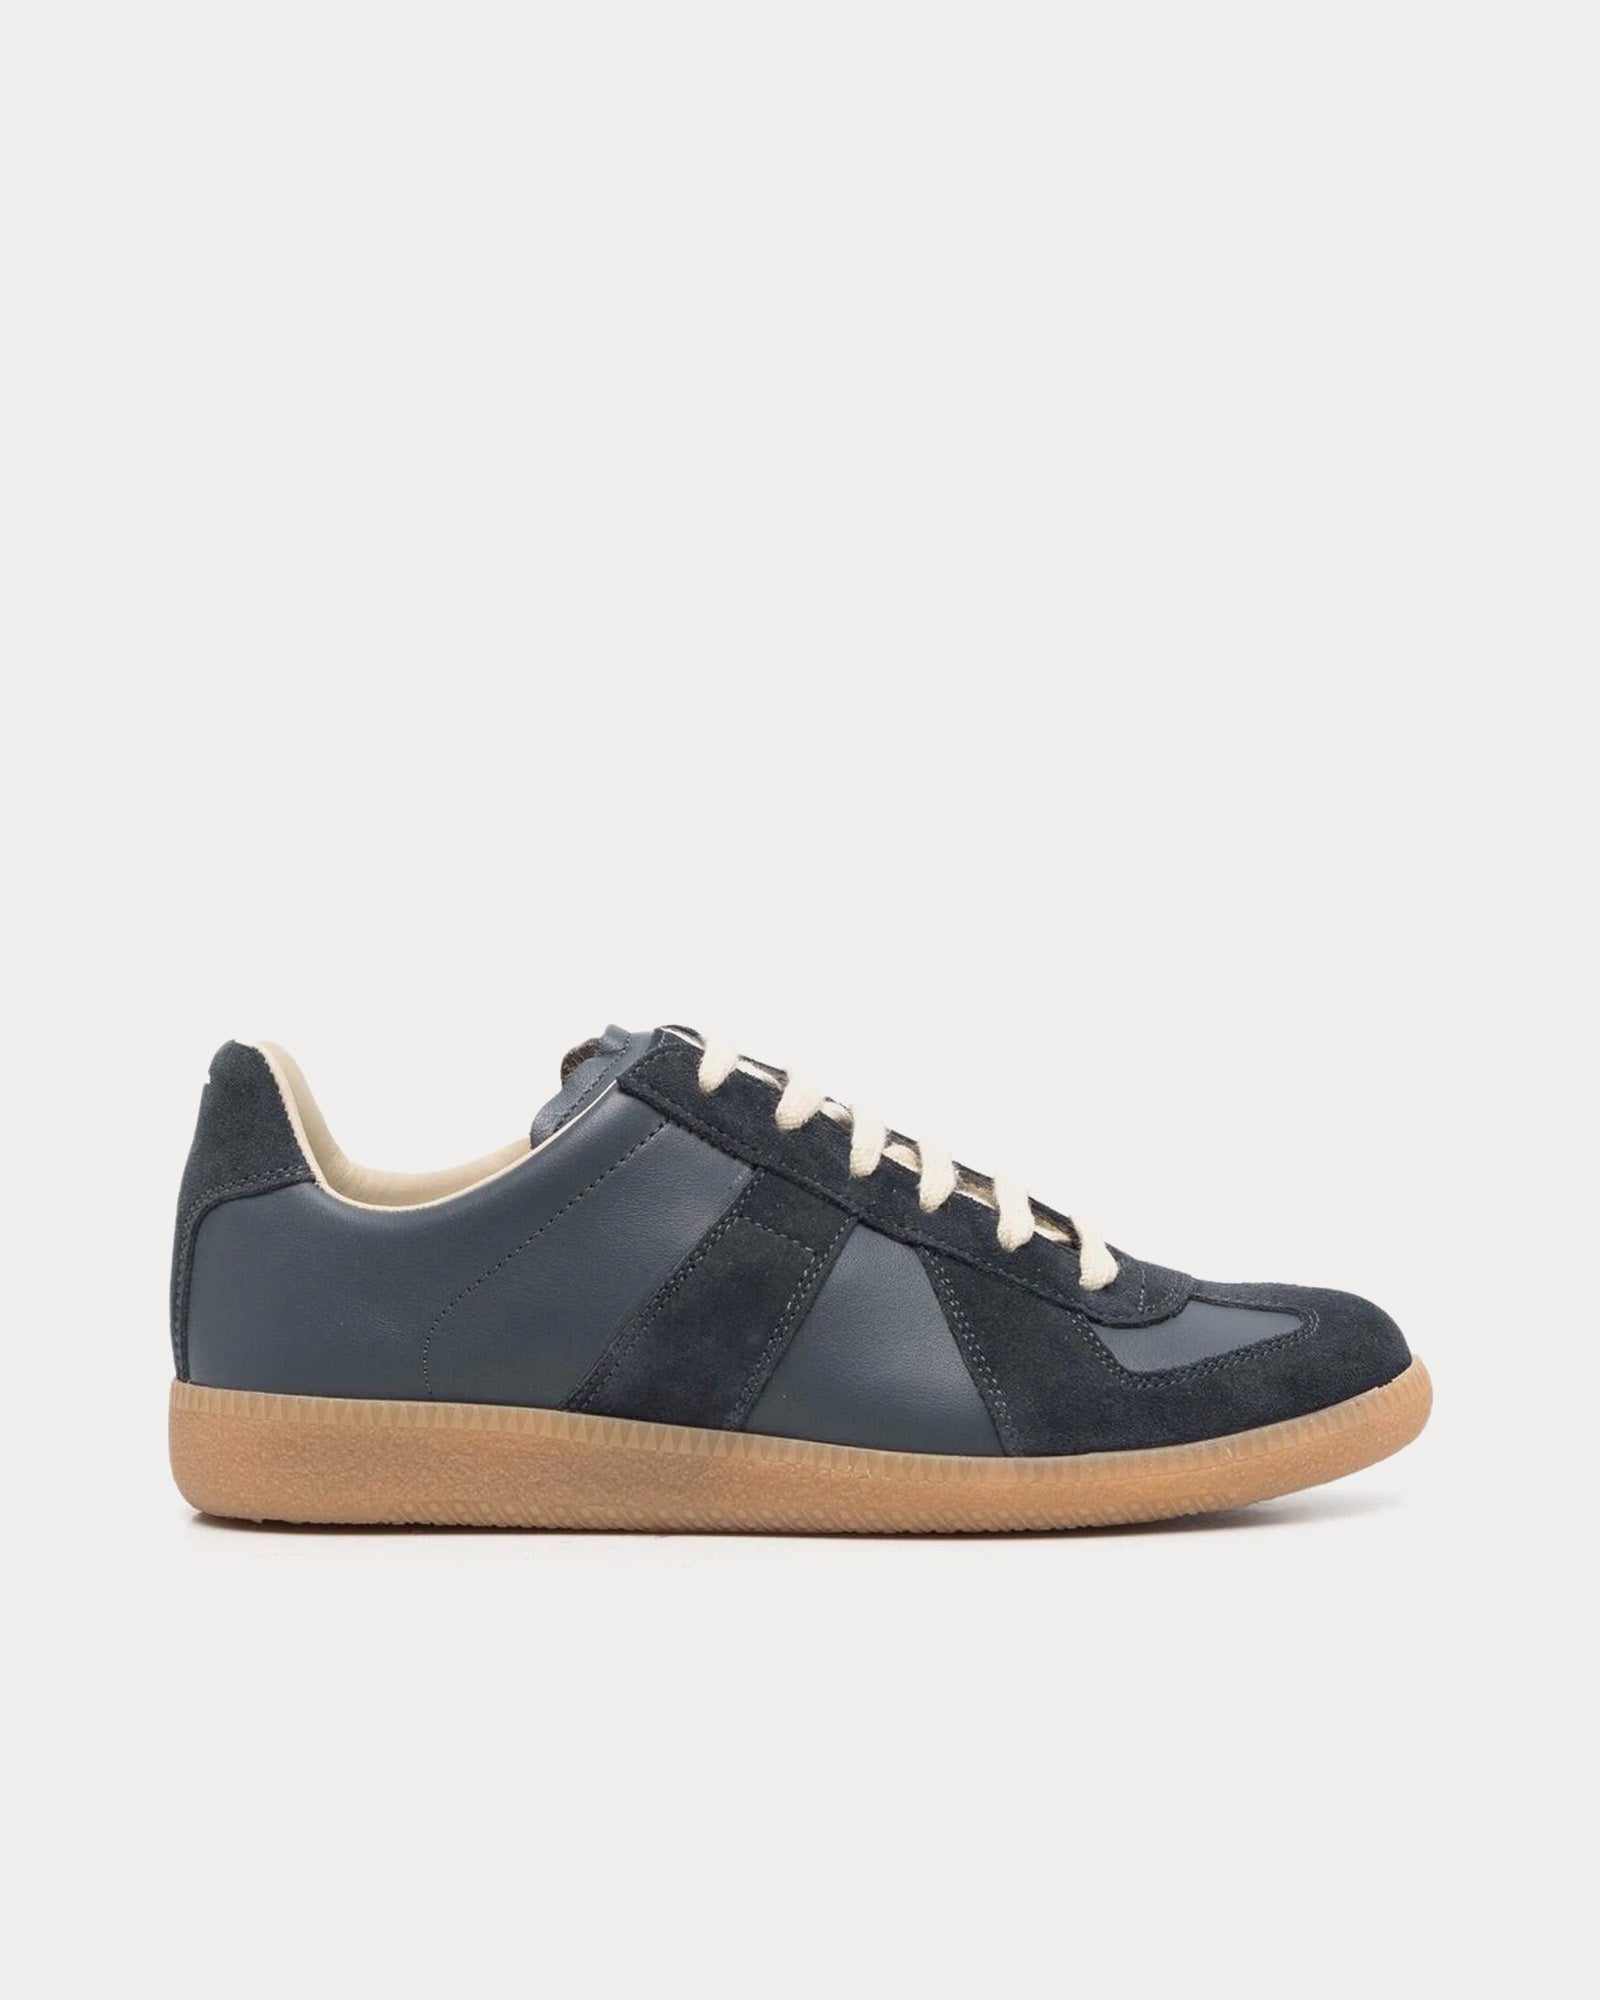 Maison Margiela - Replica Leather Pewter Low Top Sneakers